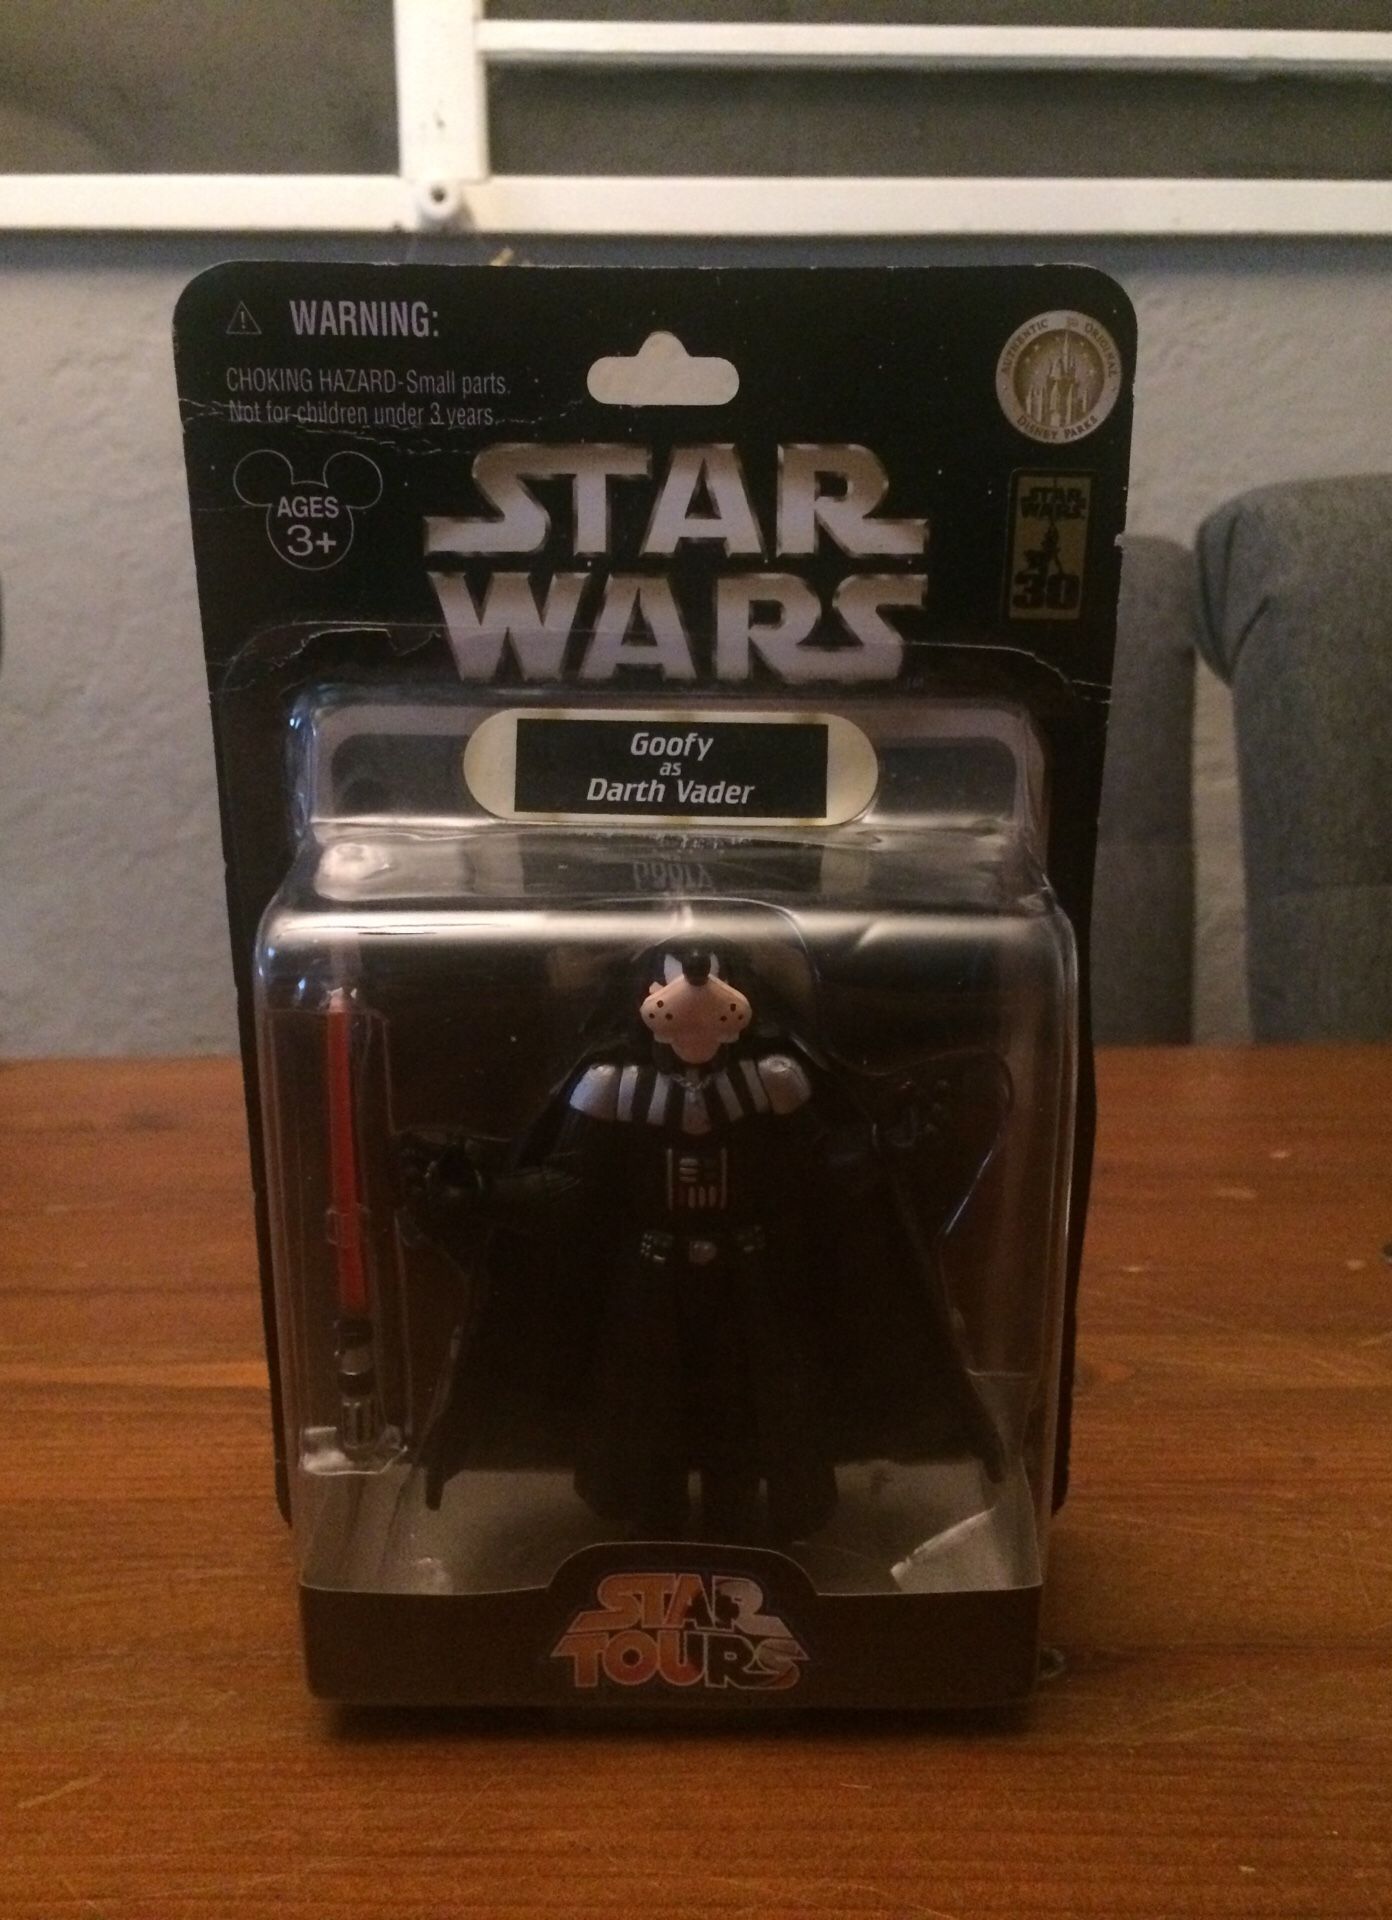 Star Wars 30th Anniversary Star Tours Disney Goofy as Darth Vader action figure